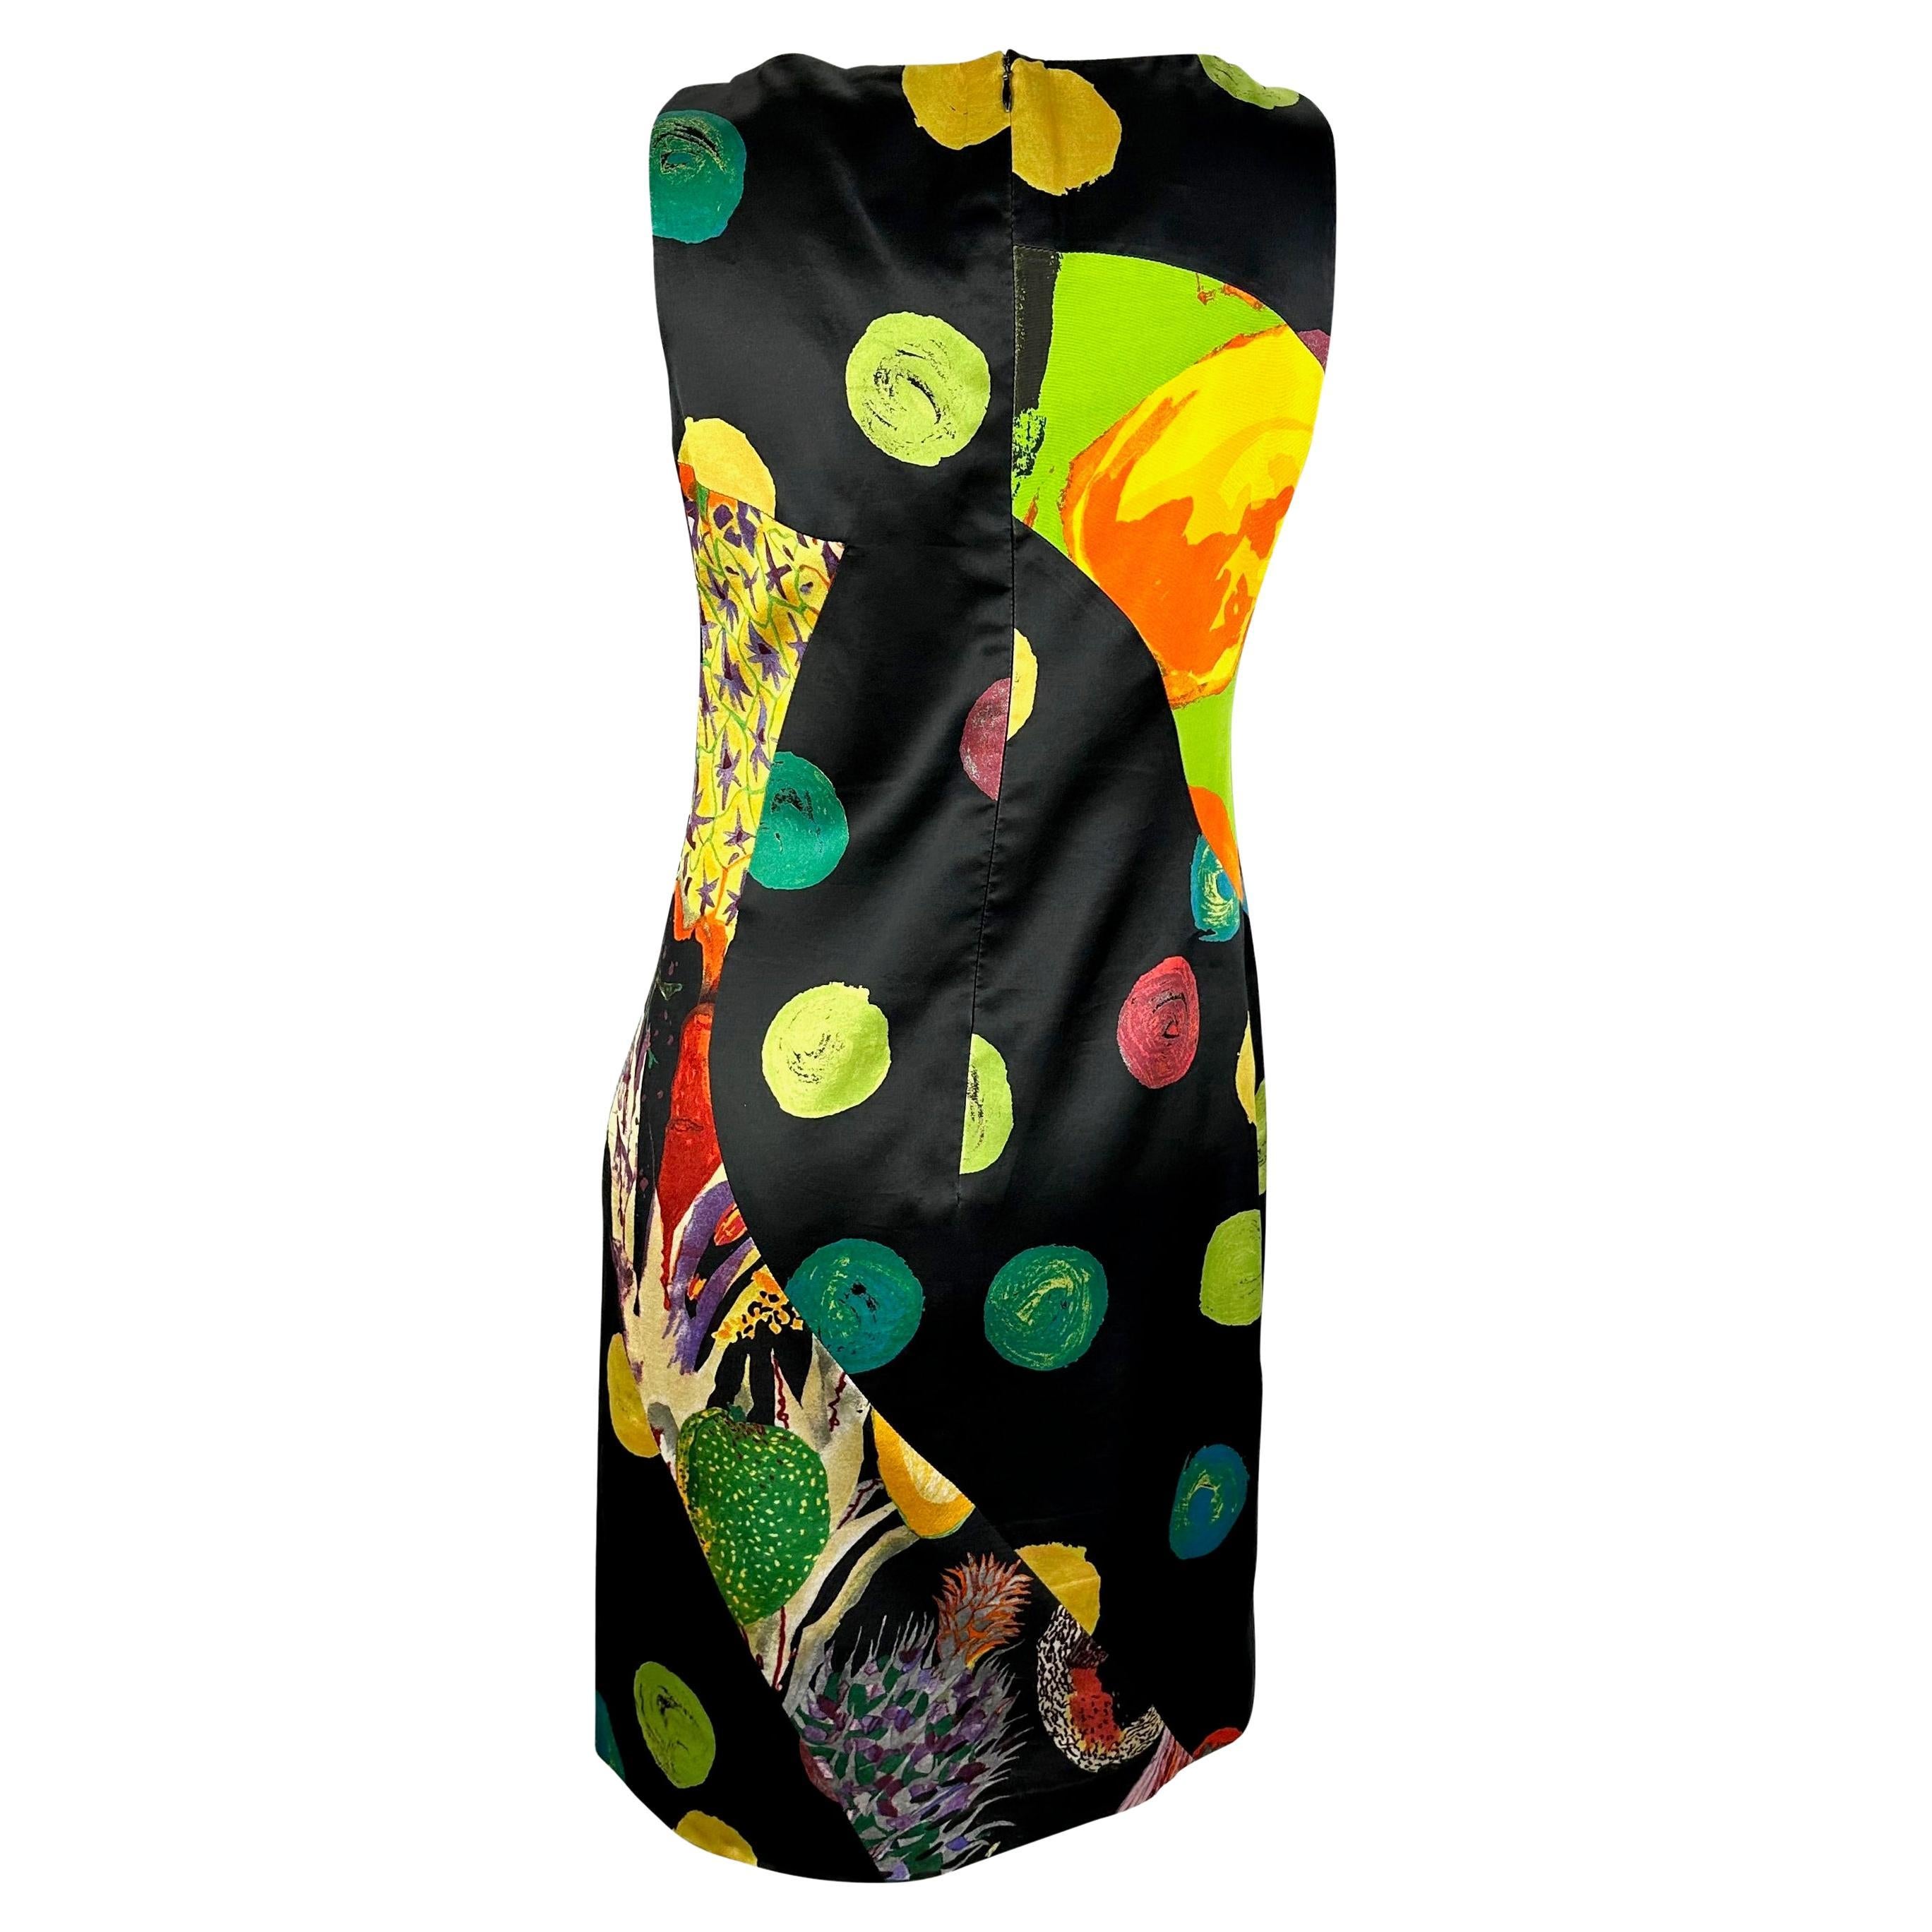 S/S 2000 Christian Lacroix Abstract Multicolor Print Panel Dress Runway  1